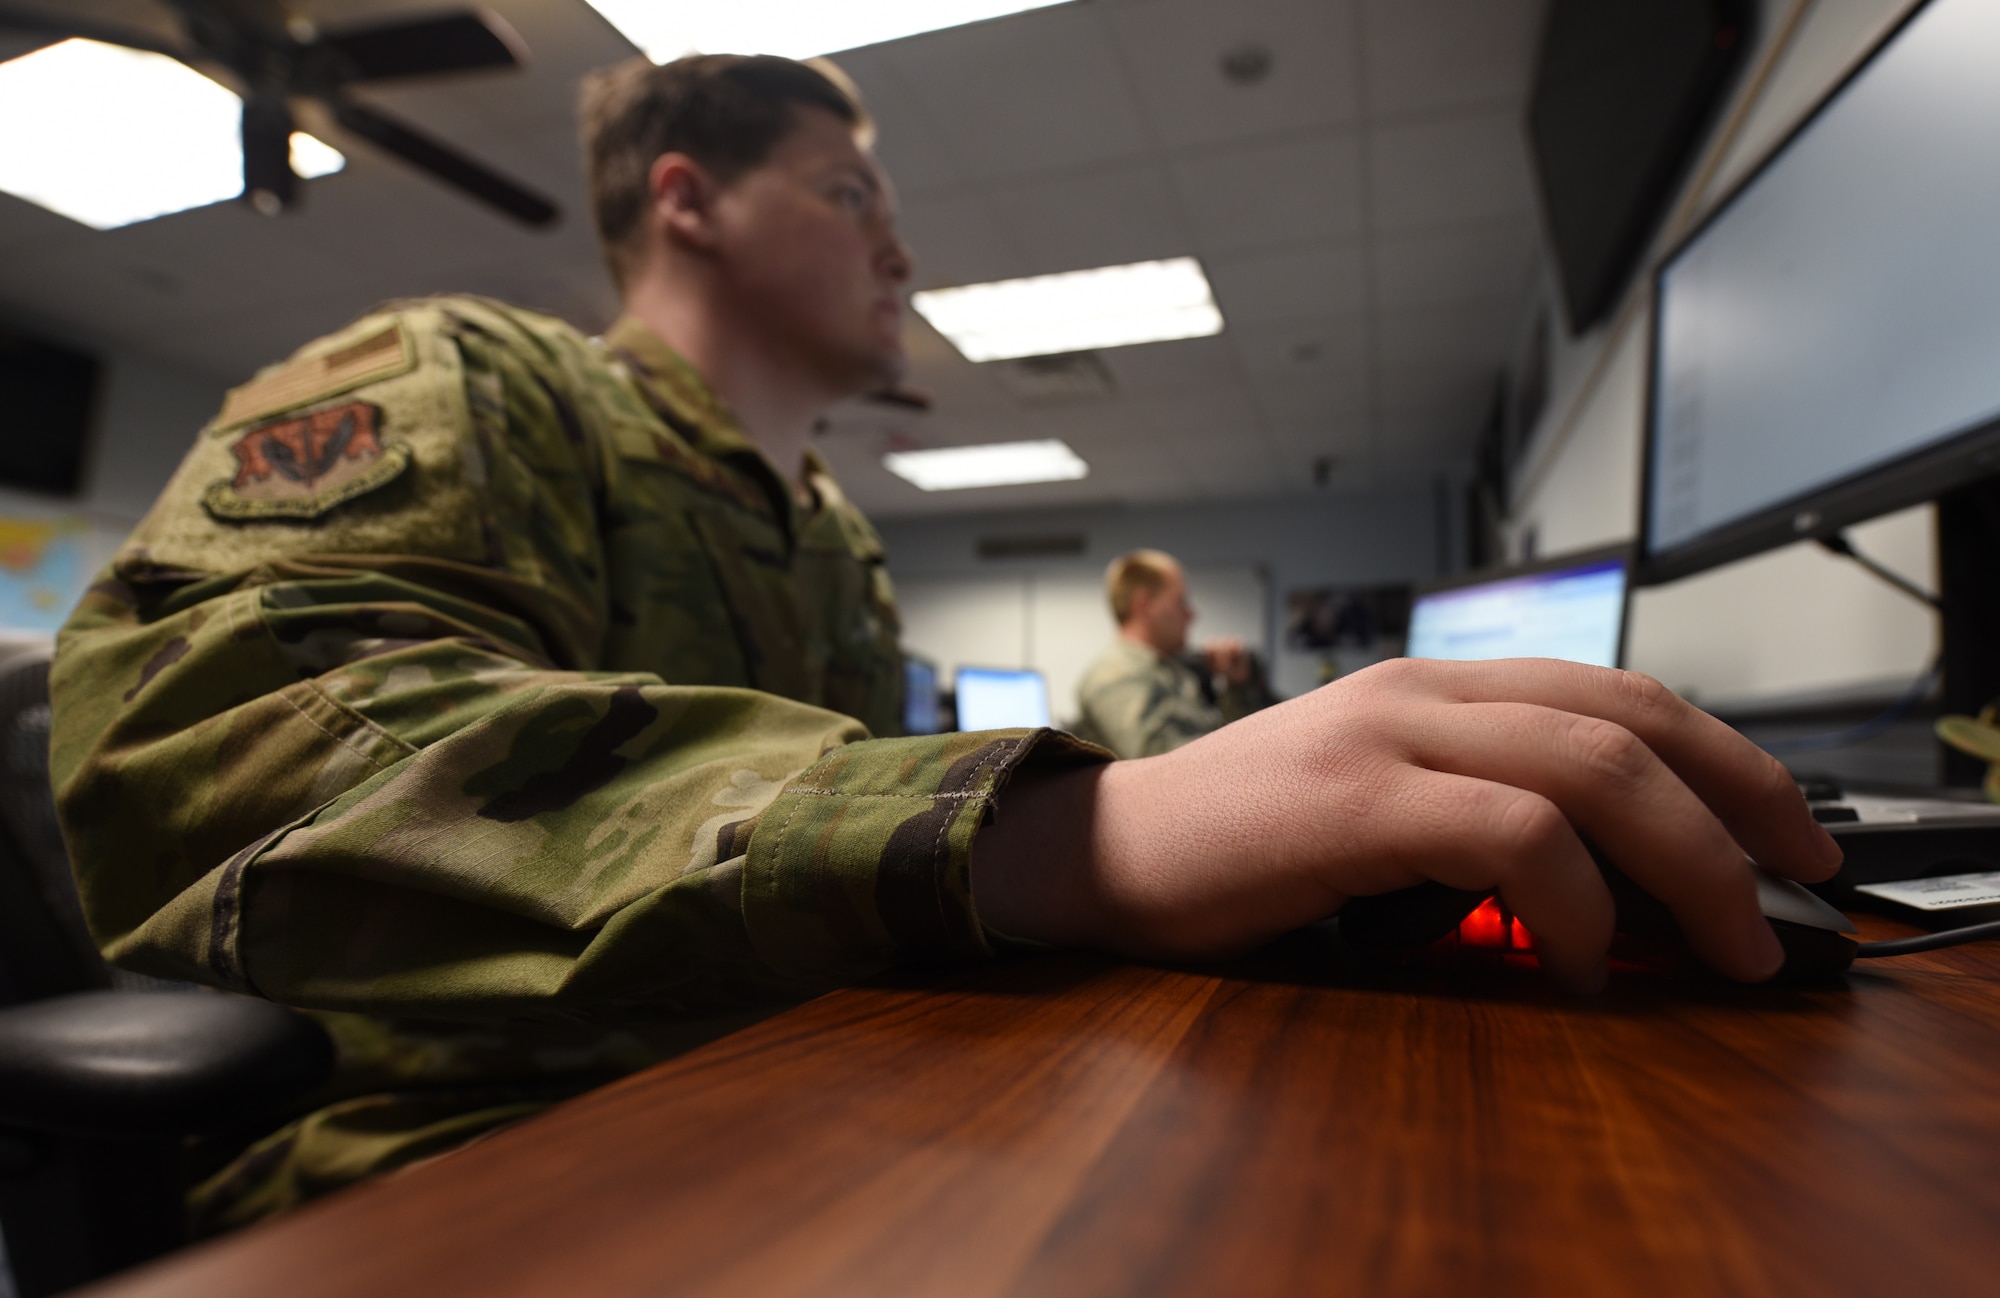 Airman working on computer